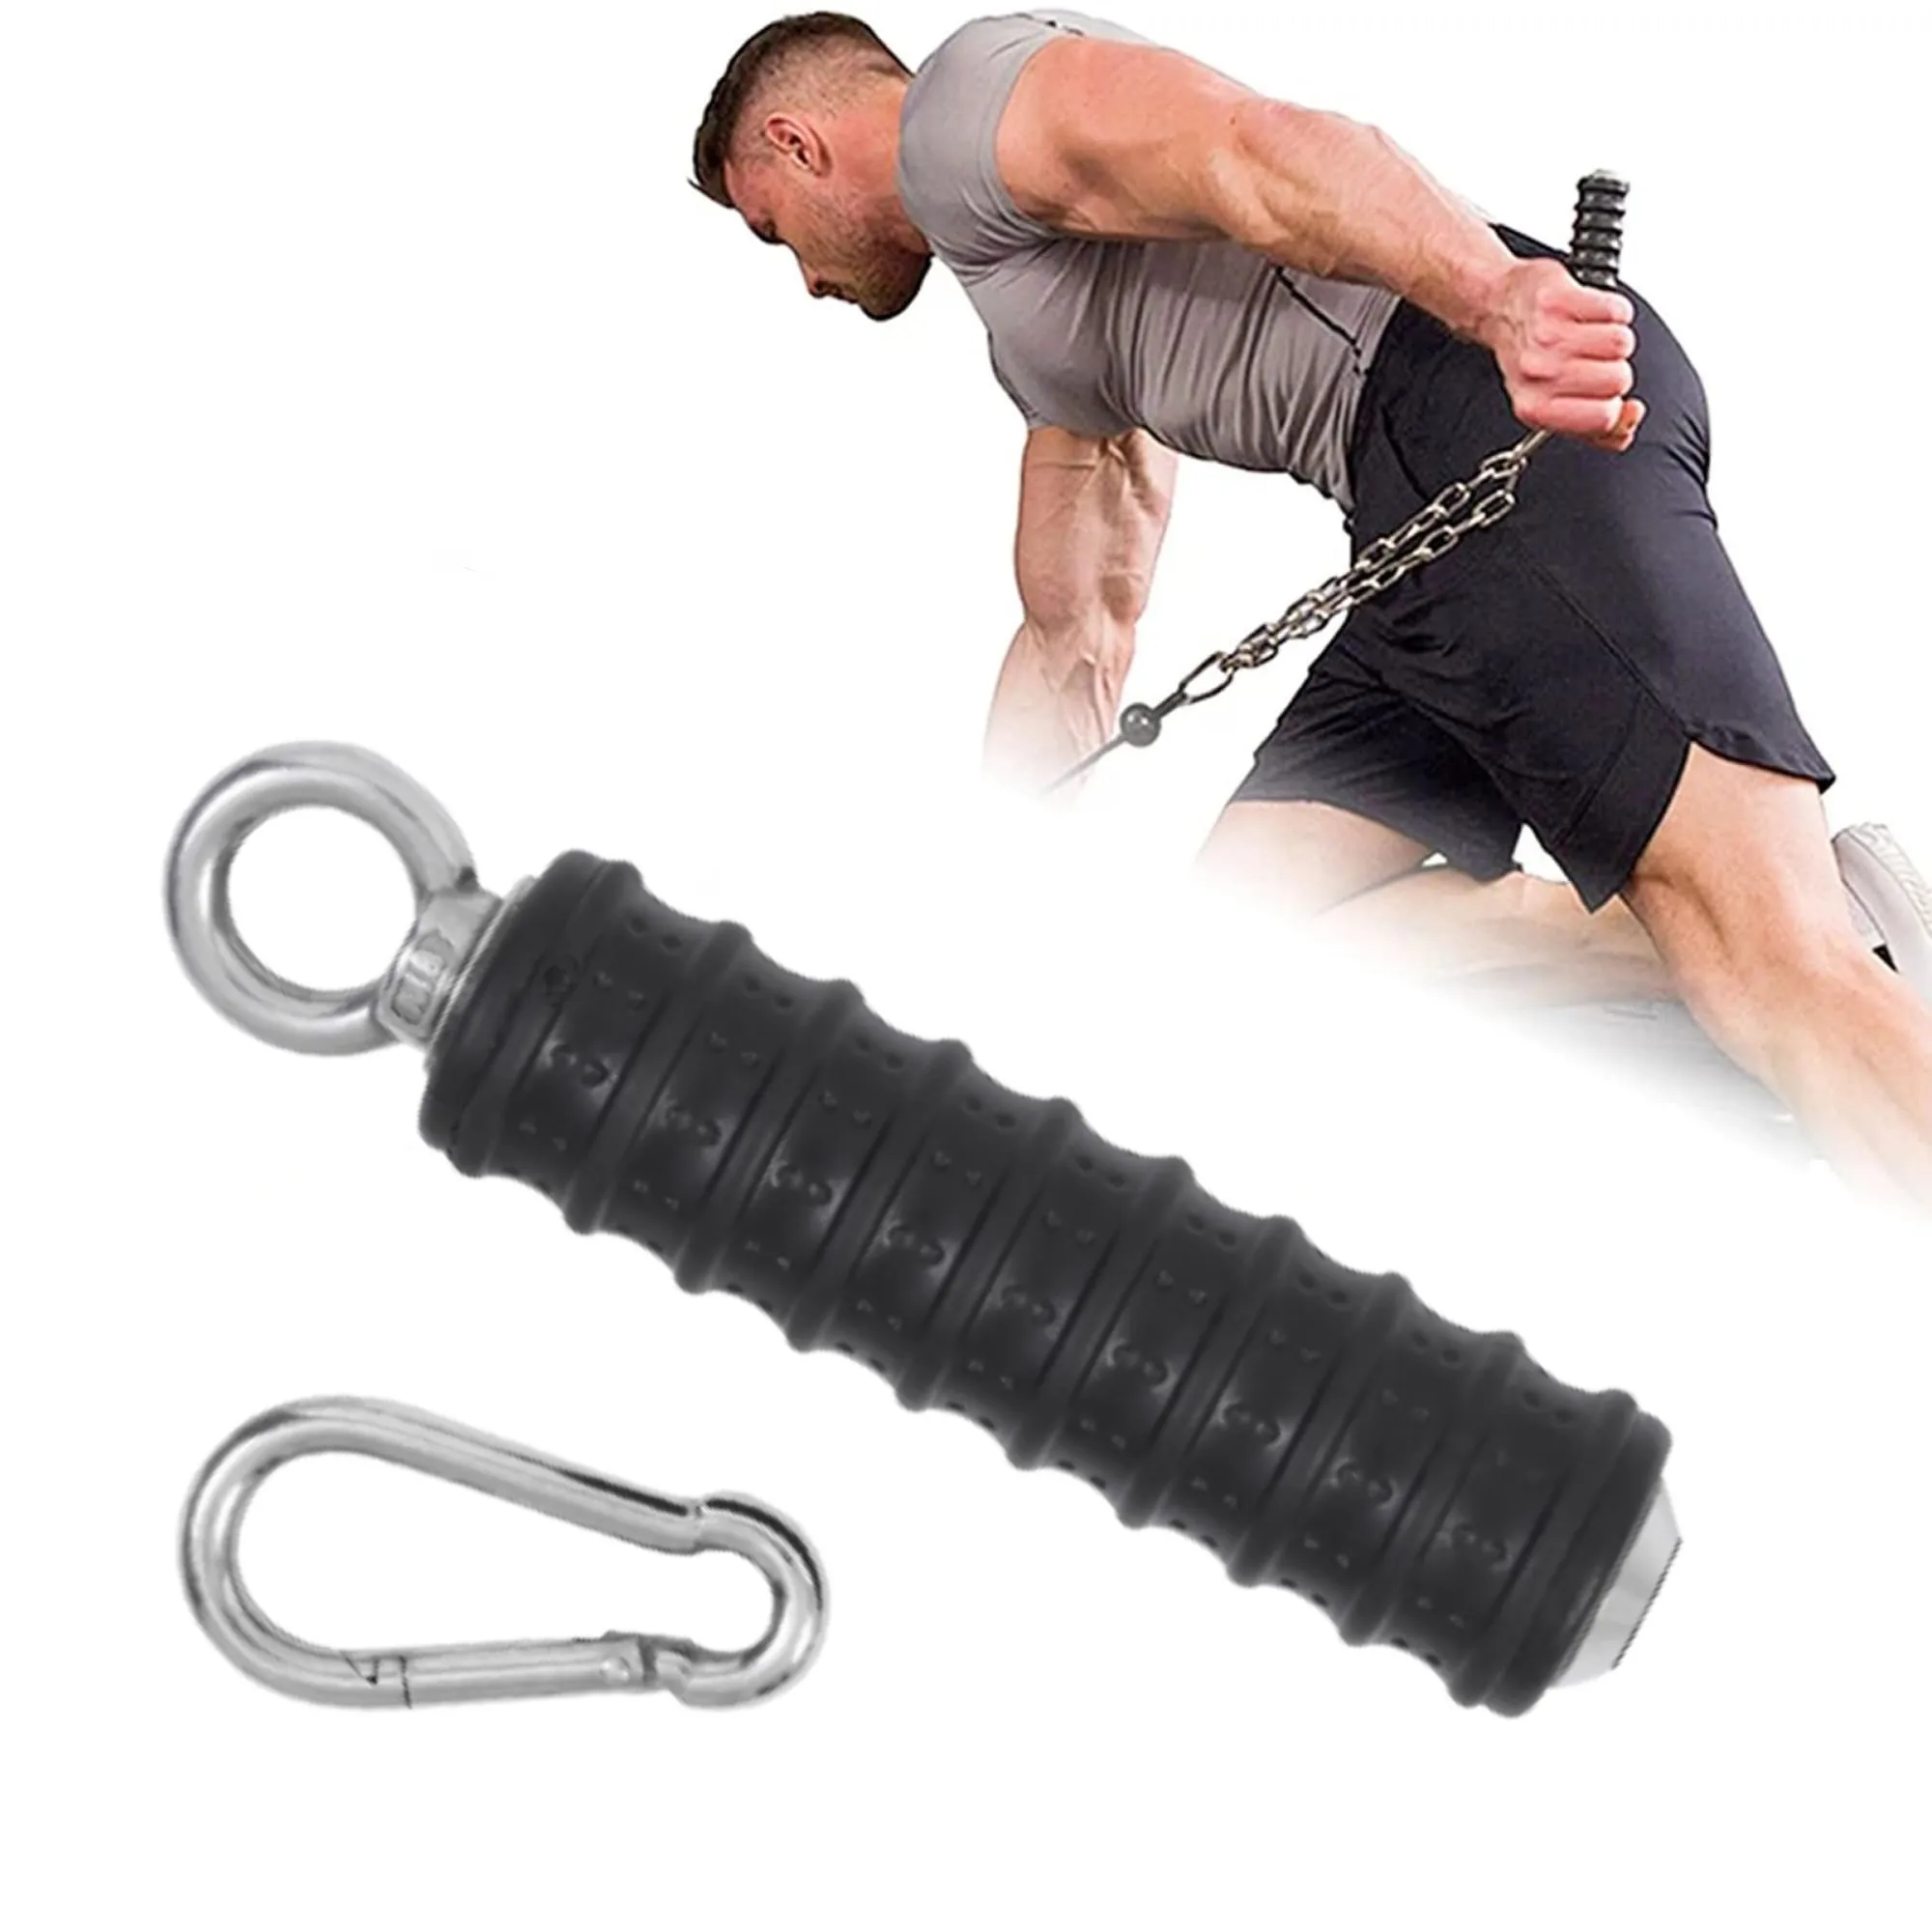 

Single Handle Cable Attachment Fitness Pull Down Heavy Exercise Hand Grip for Gym Home Tricep Bicep Training for Gym Home